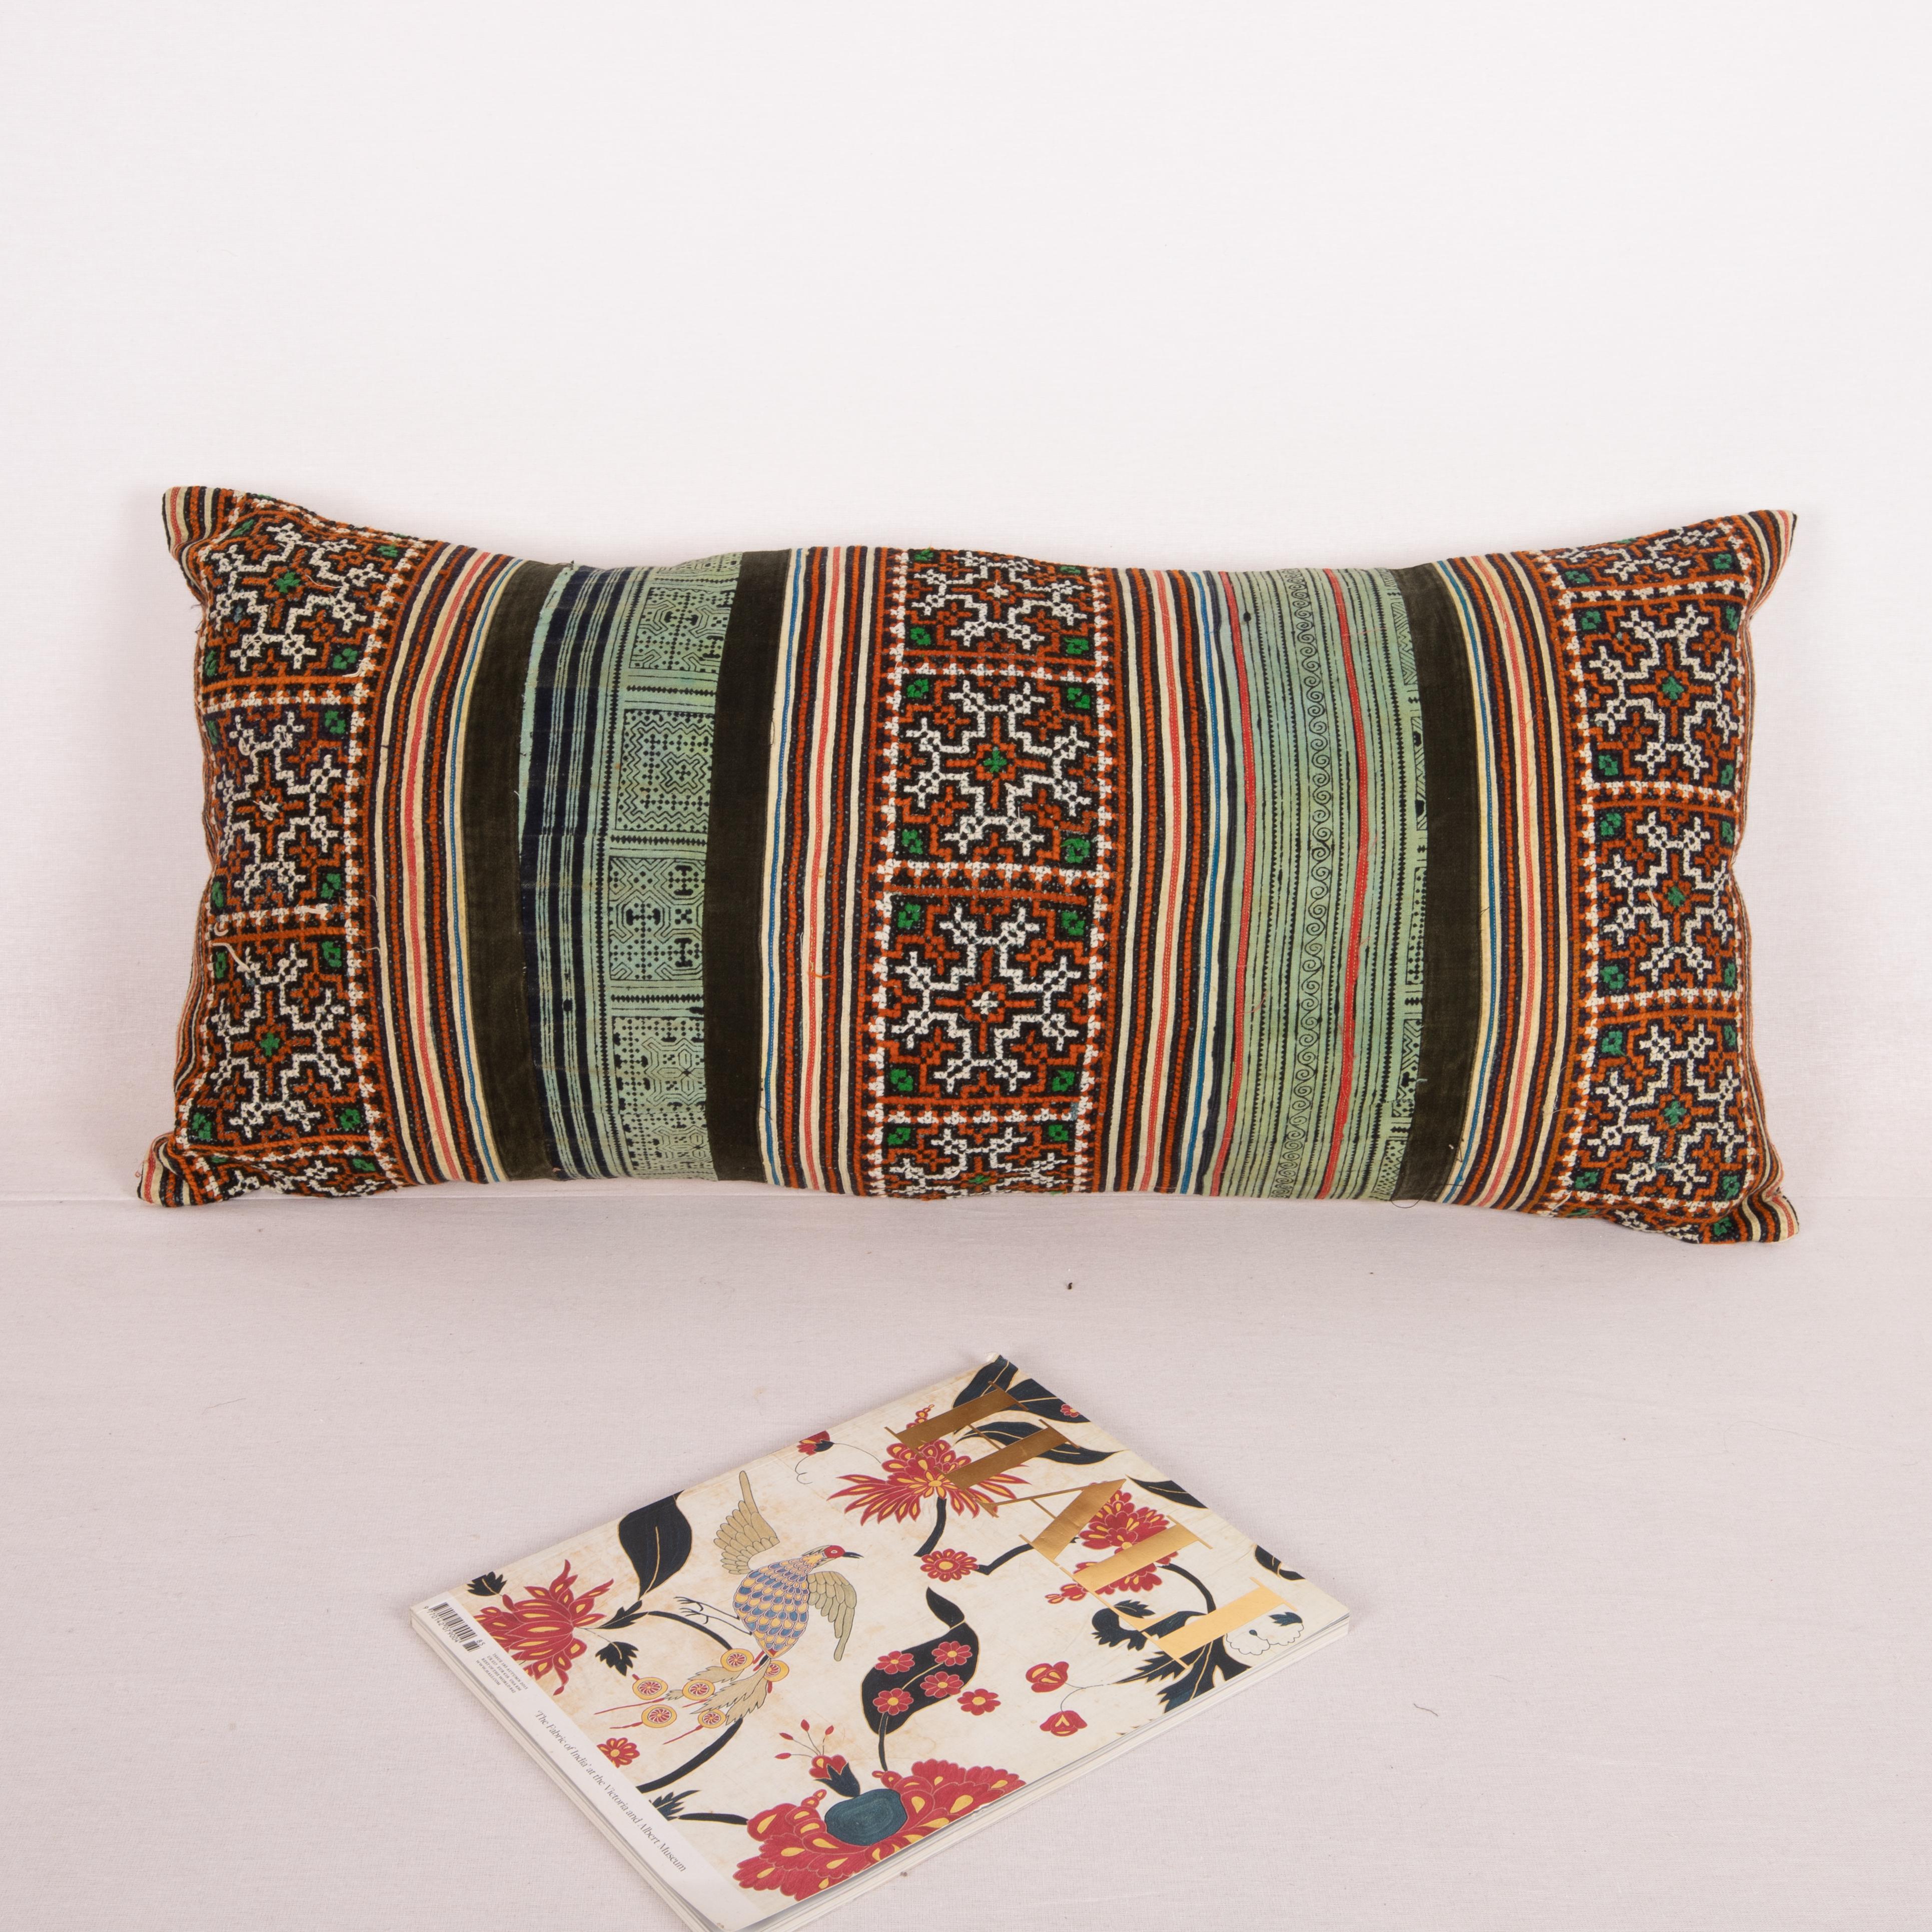 Tribal Pillow Case Made from Hmong Hill Tribe Batik Textile Mid 20th C